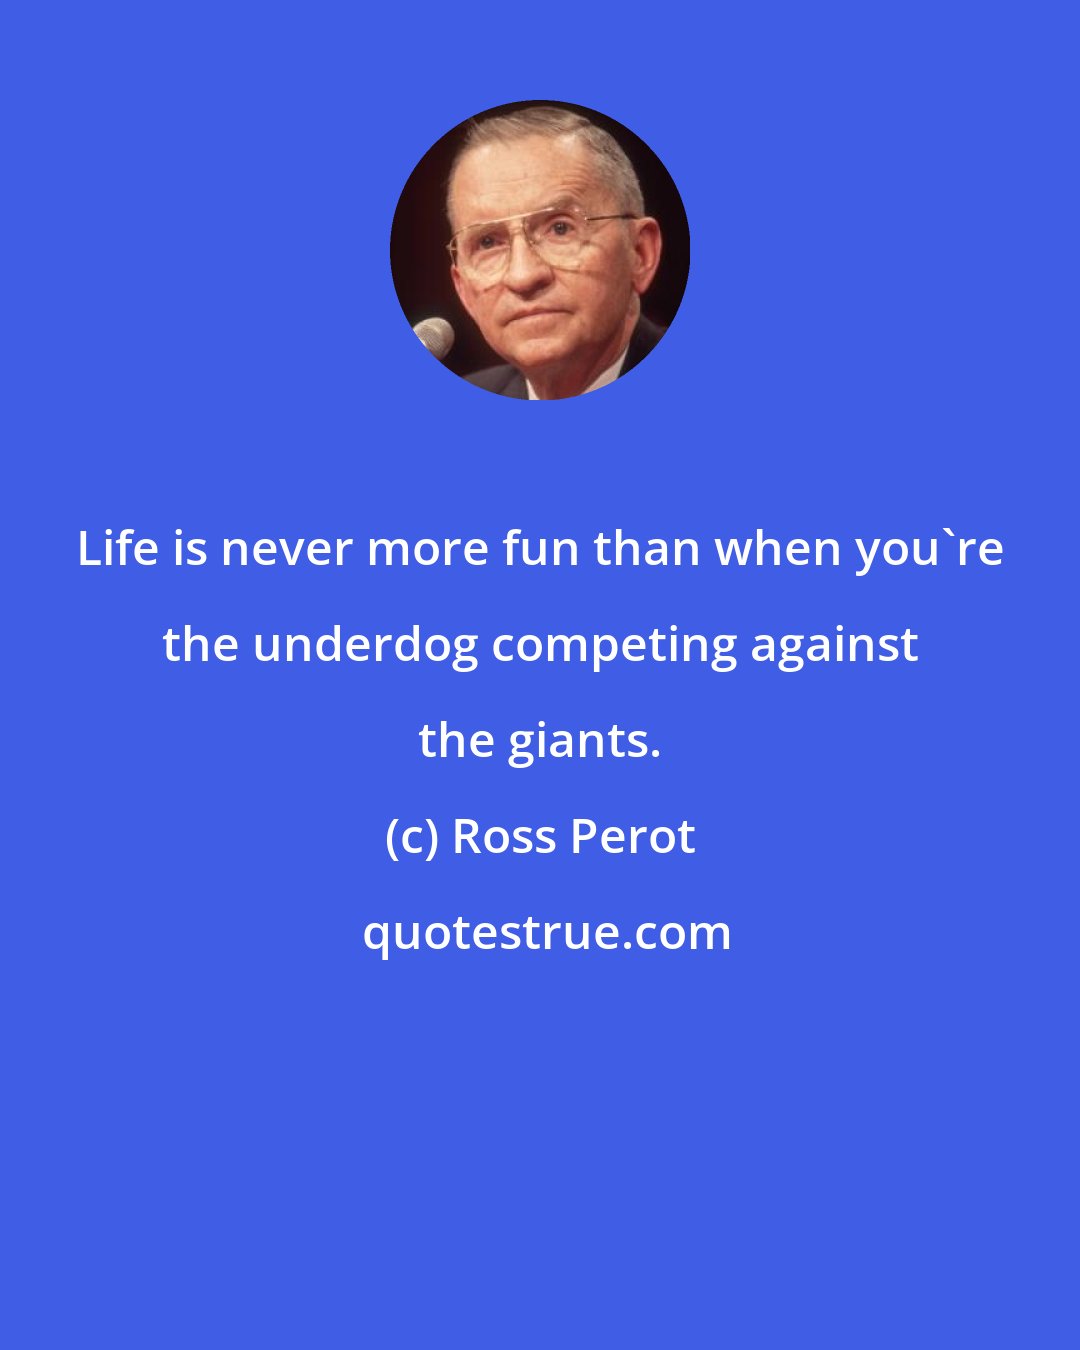 Ross Perot: Life is never more fun than when you're the underdog competing against the giants.